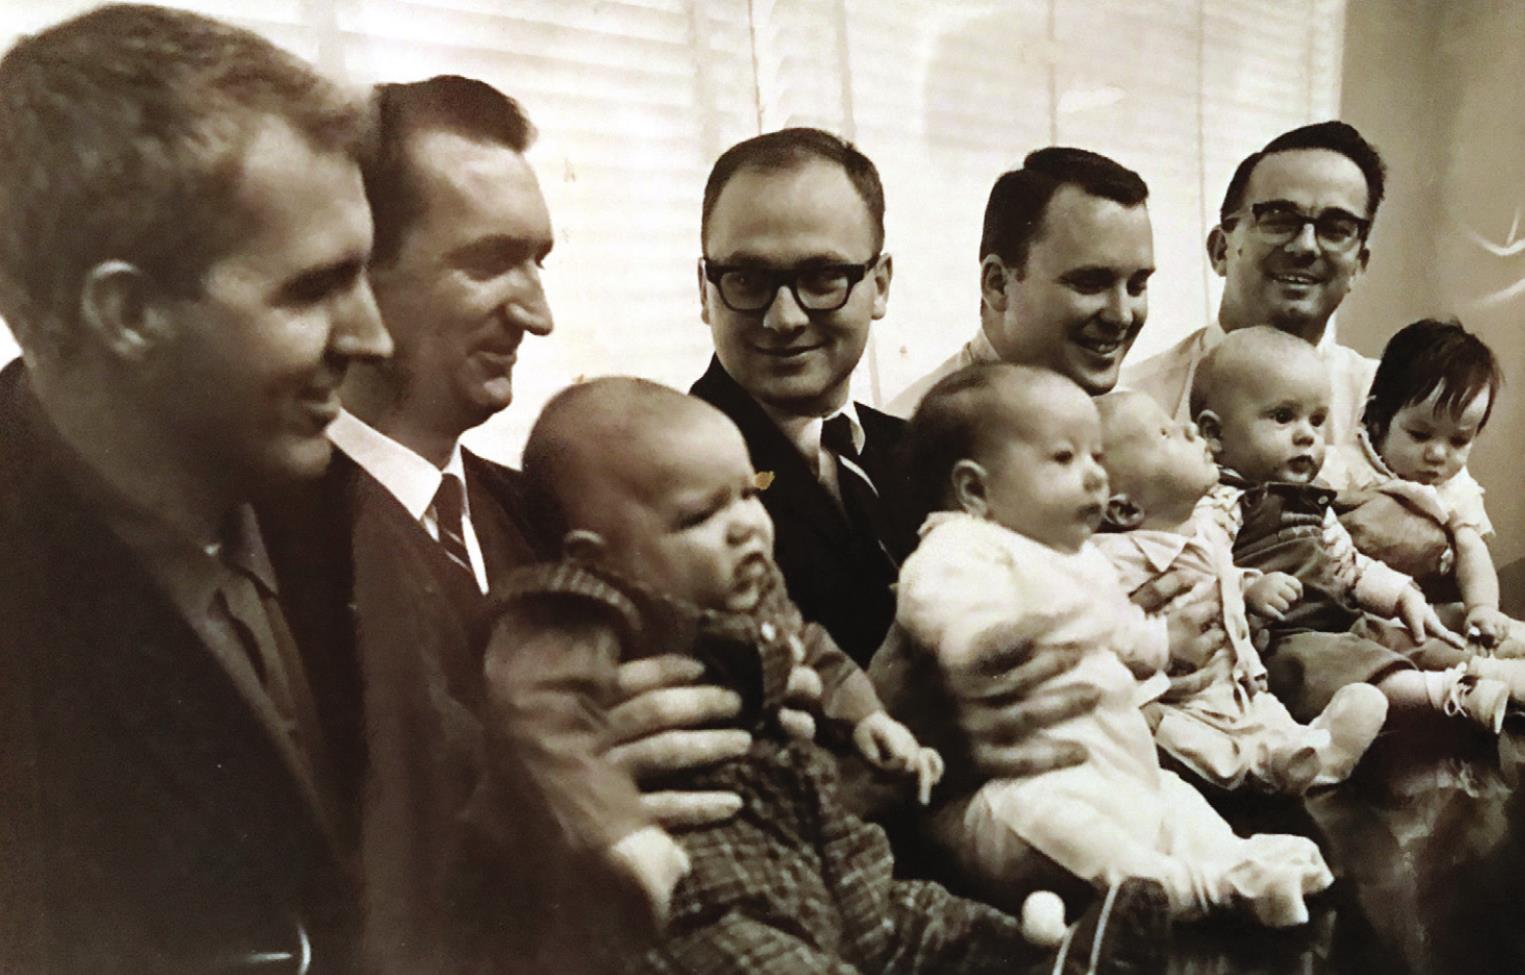 1967 was a very productive year for the SWOSU biology department when they welcomed five new babies. Among those from left are Hobart Landreth and son Phillip, Jack Harder and daughter Rhonda, Richard Craven and son, Gary Wolgamott and son Thad, Jim Lovell and daughter Diana. Dr. Diana Lovell was just named the new president of SWOSU this week. Provided